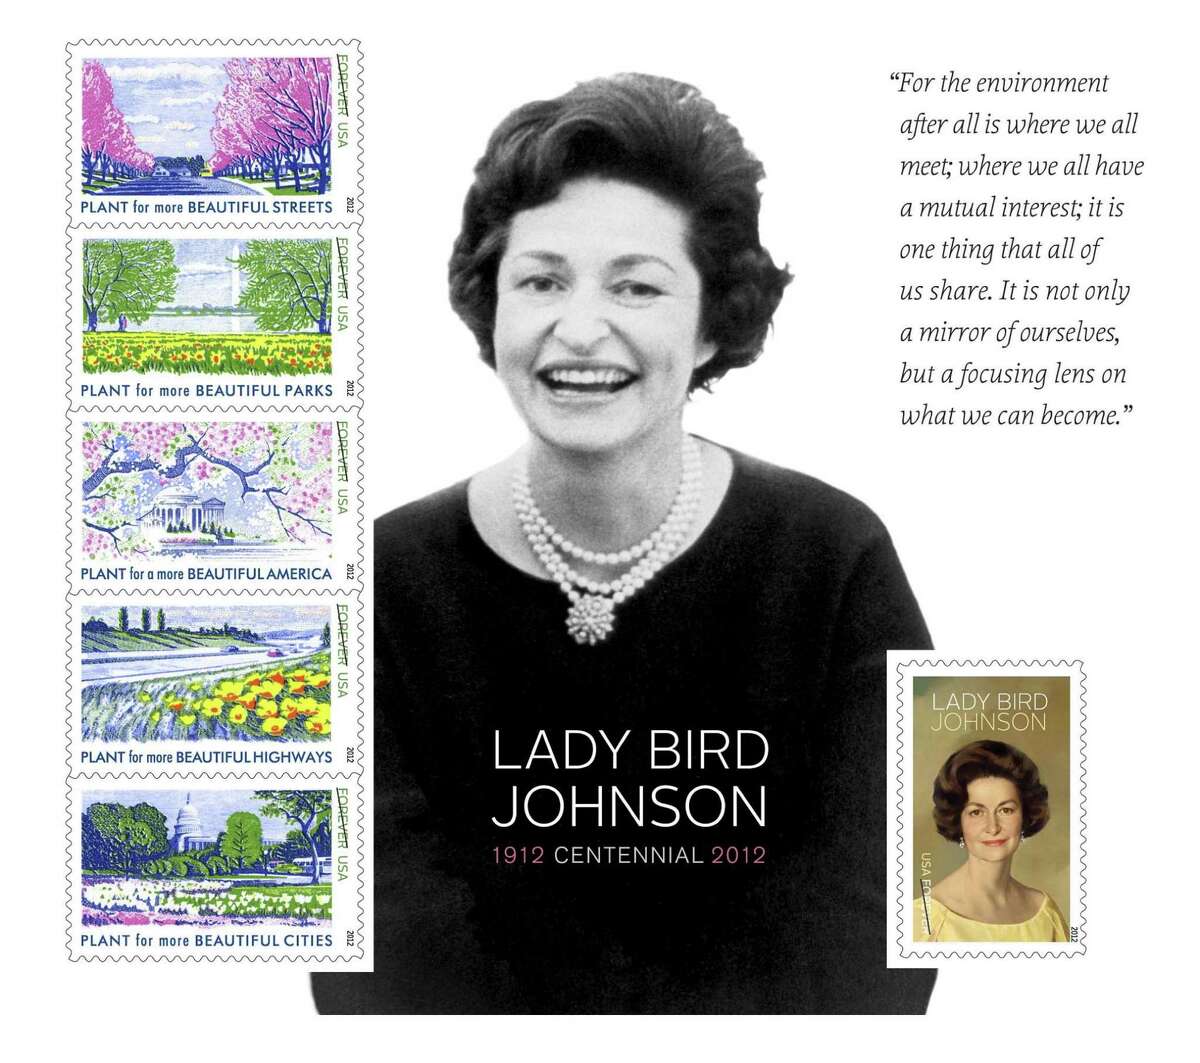 This undated image provided by U.S. Postal Service shows the Lady Bird Johnson souvenir Forever stamps sheet. The smiling face of Lady Bird Johnson goes on a U.S. postage stamp dedicated by the U.S. Postal Service in Austin, Texas on Friday, Nov. 30, 2012. The dedication at the Lady Bird Johnson Wildflower Center of the University of Texas at Austin came on the 47th anniversary of the signing of legislation Johnson promoted to beautify America's highways. The souvenir sheets consist of six stamps, each with a quote from Johnson on her belief in environmental protection of the nation's countryside. (AP Photo/U.S. Postal Service)